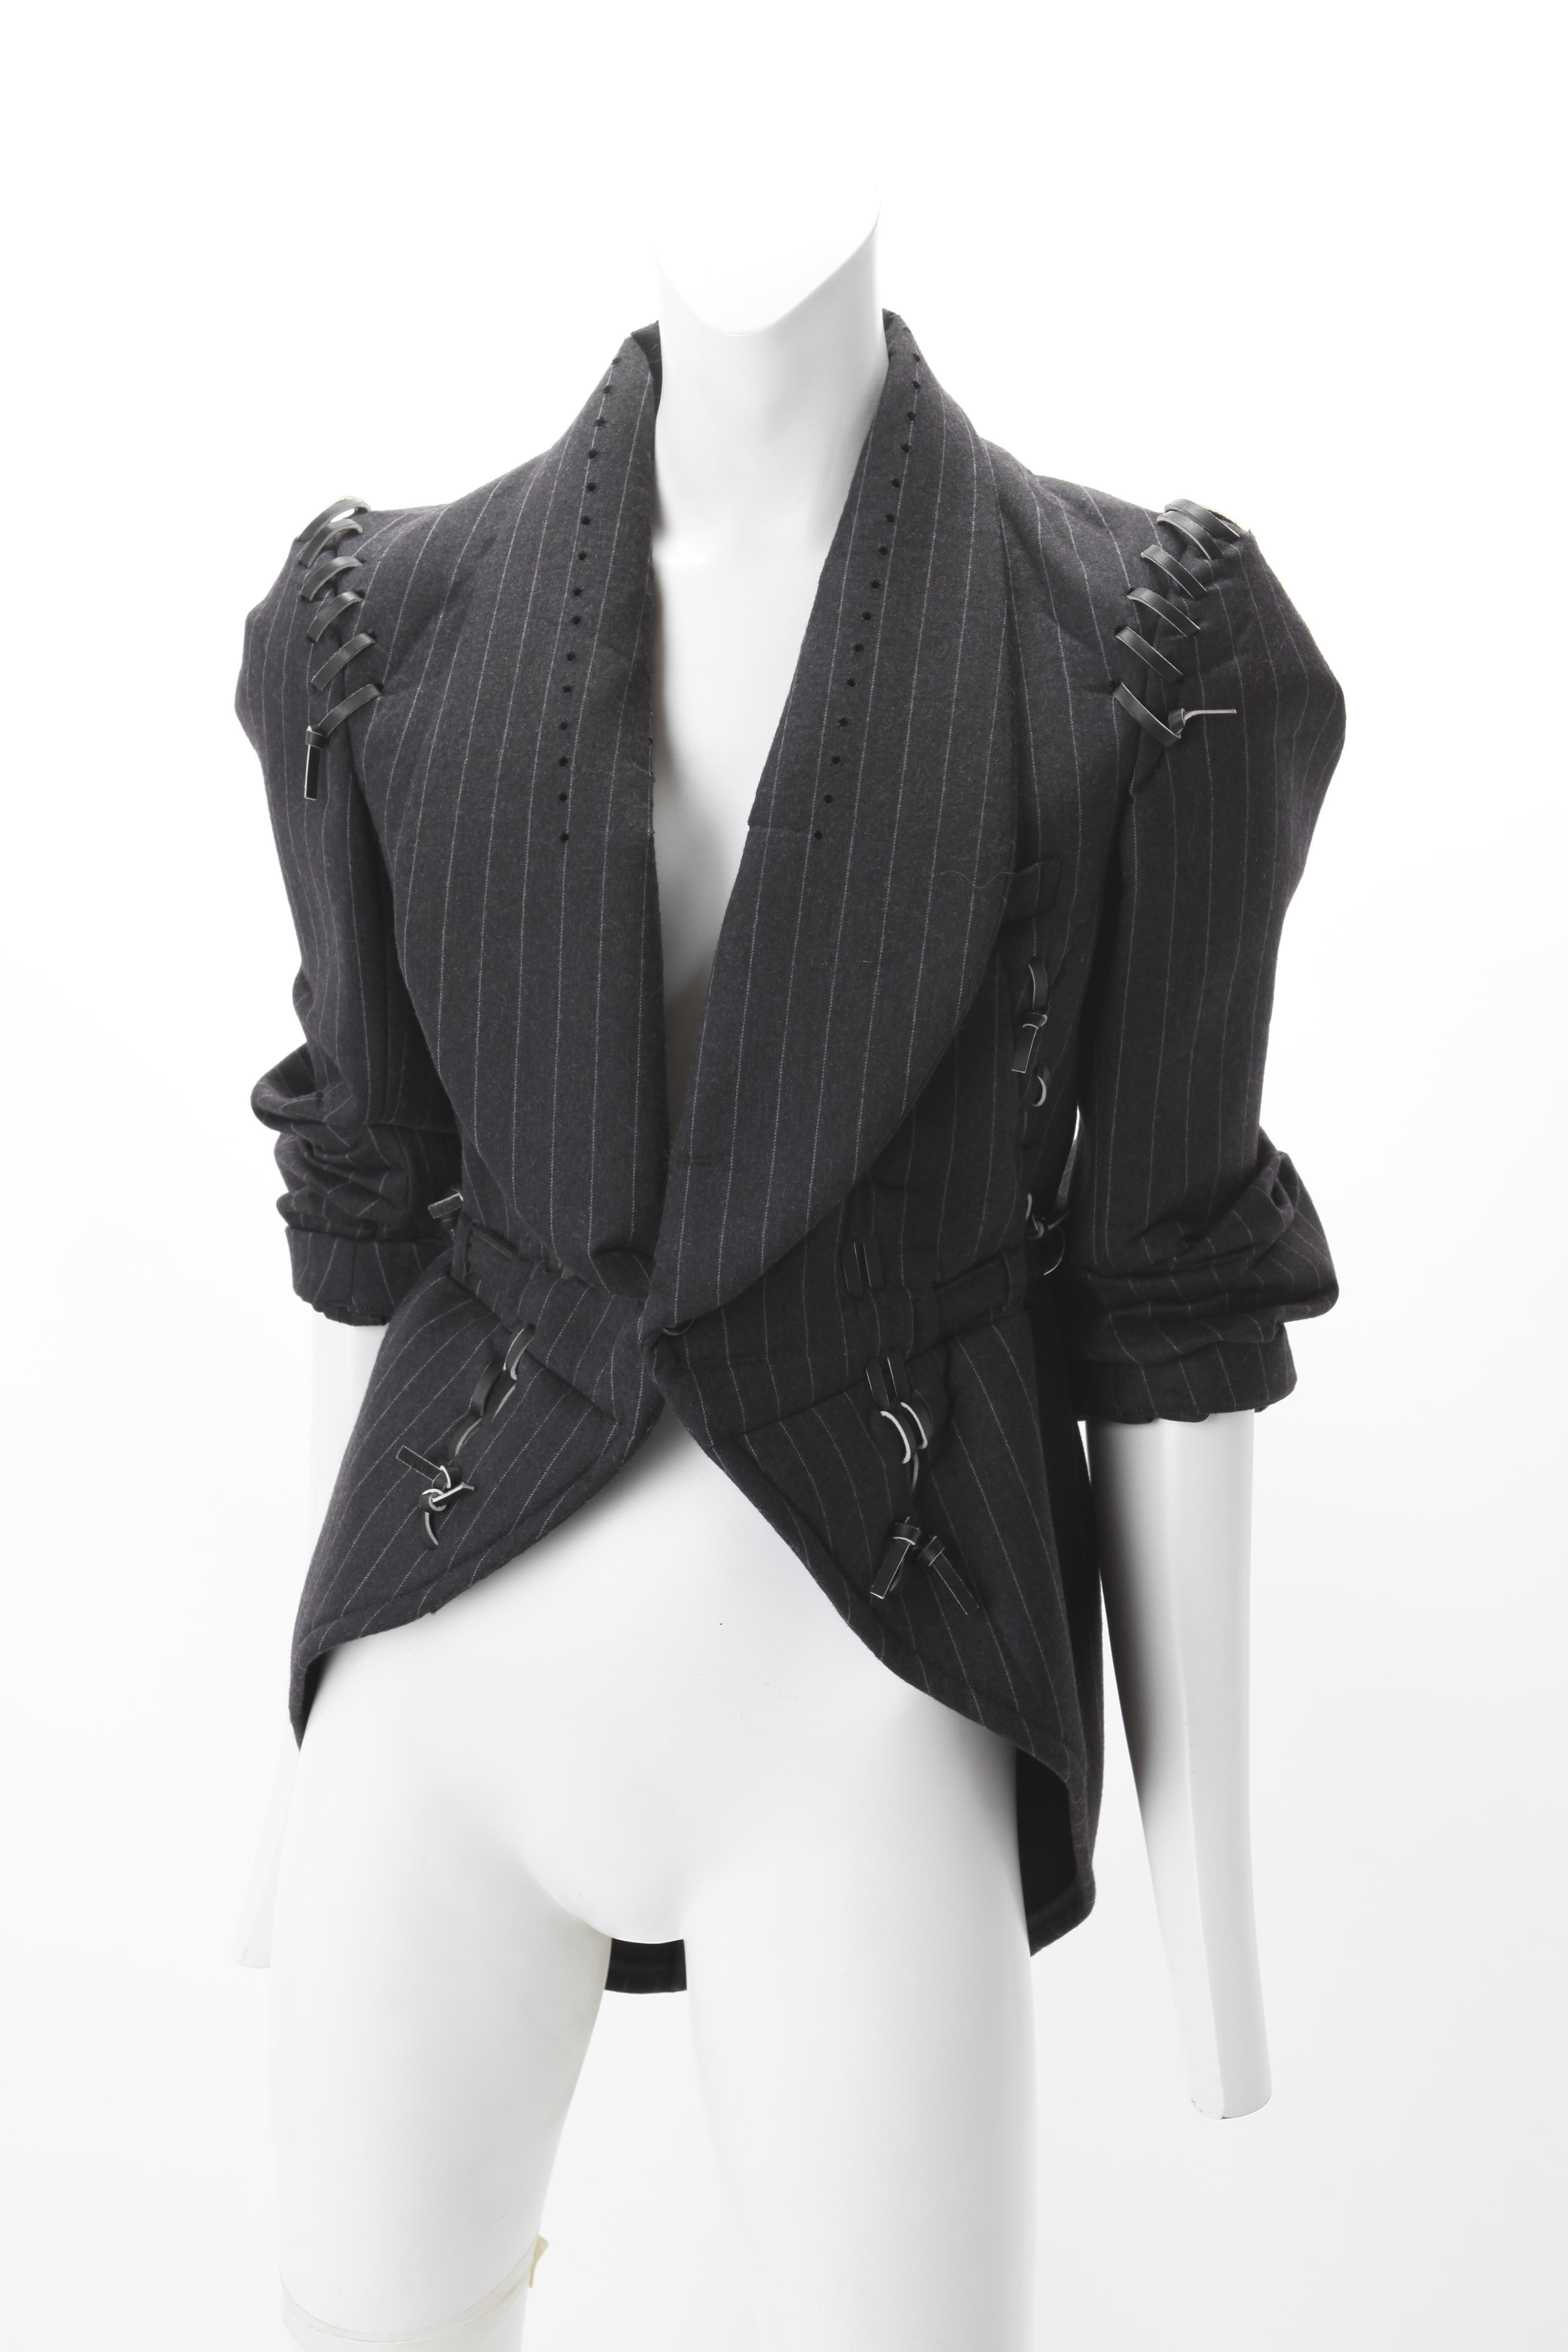 Commes des Garcons Corset Jacket w/ Leather Ties 2004 

Gray wool pinstripe Jacket with leather corset ties throughout; Tails with vent at back; single button fastening at front waist.  Fits US sz 4 